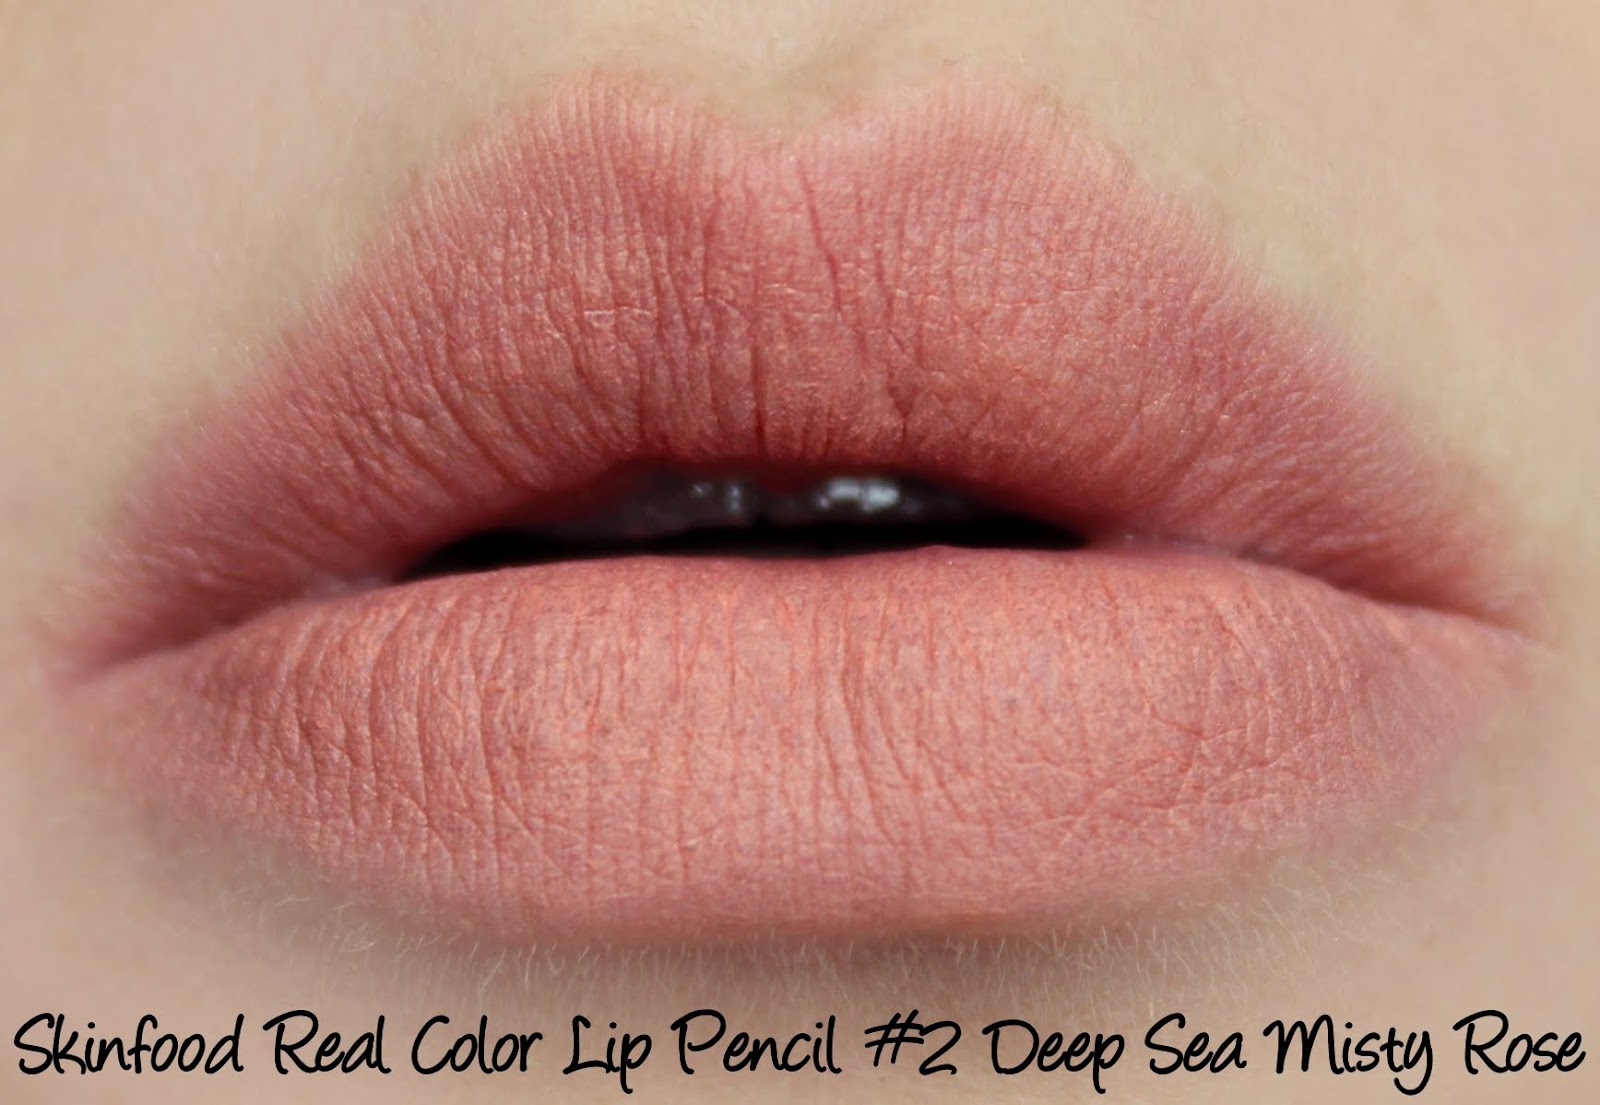 Skinfood Seaweed Real Color Lip Pencils - #2 Deep Sea Misty Rose Swatches & Review